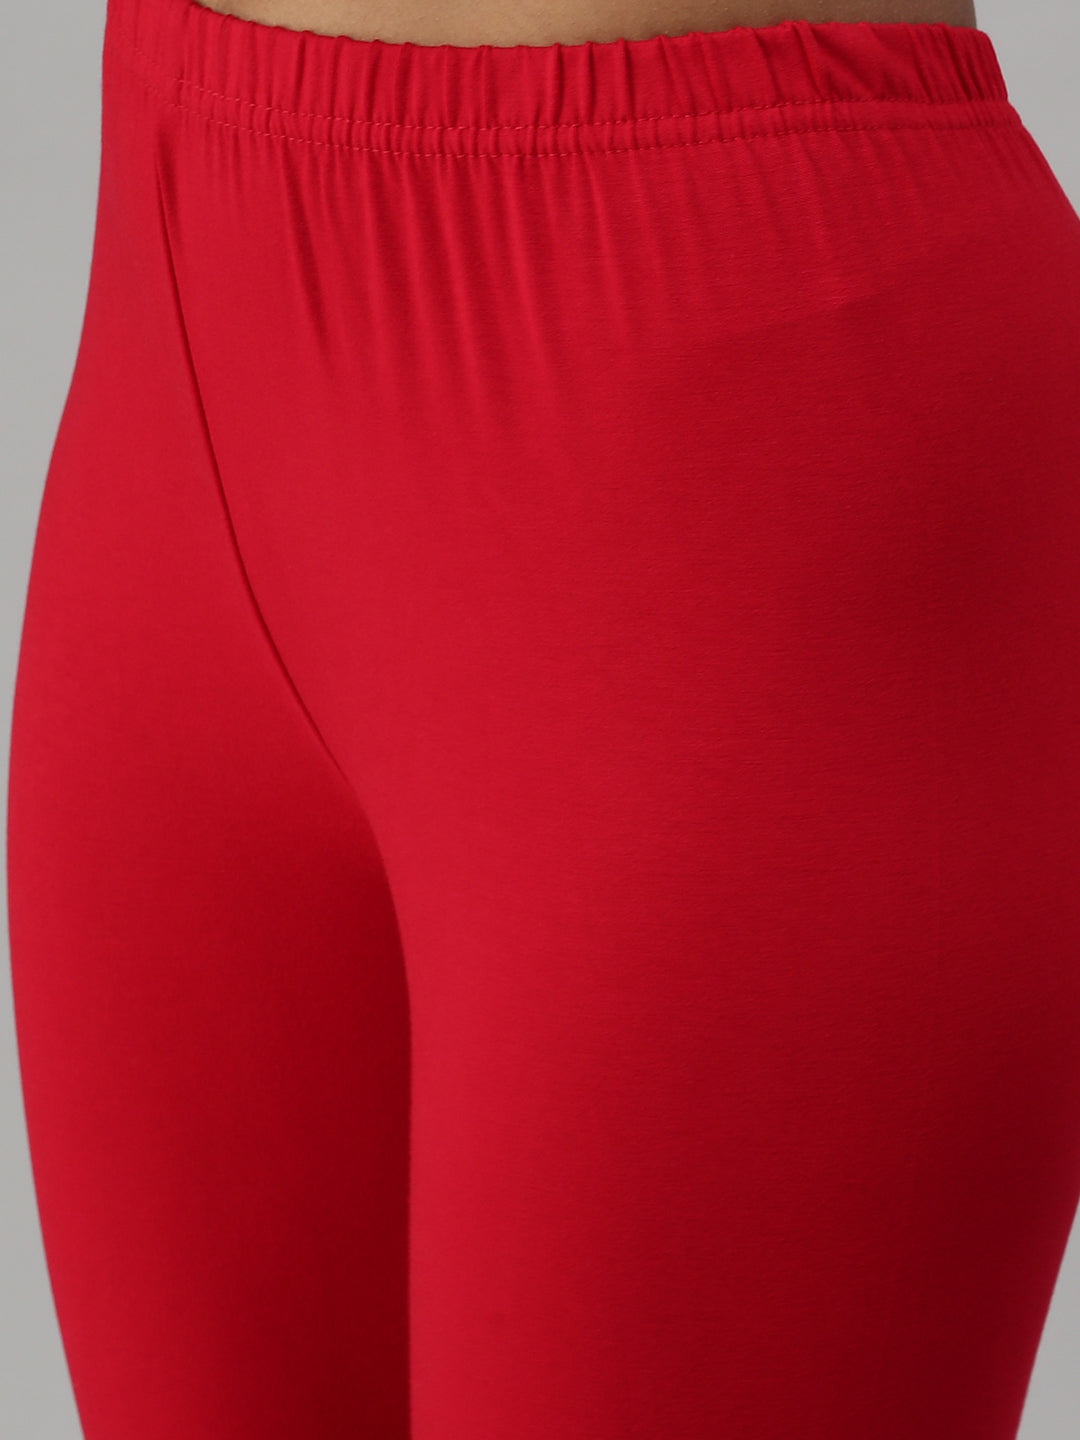 Shop Prisma's Apple Red Ankle Leggings for Stylish Comfort